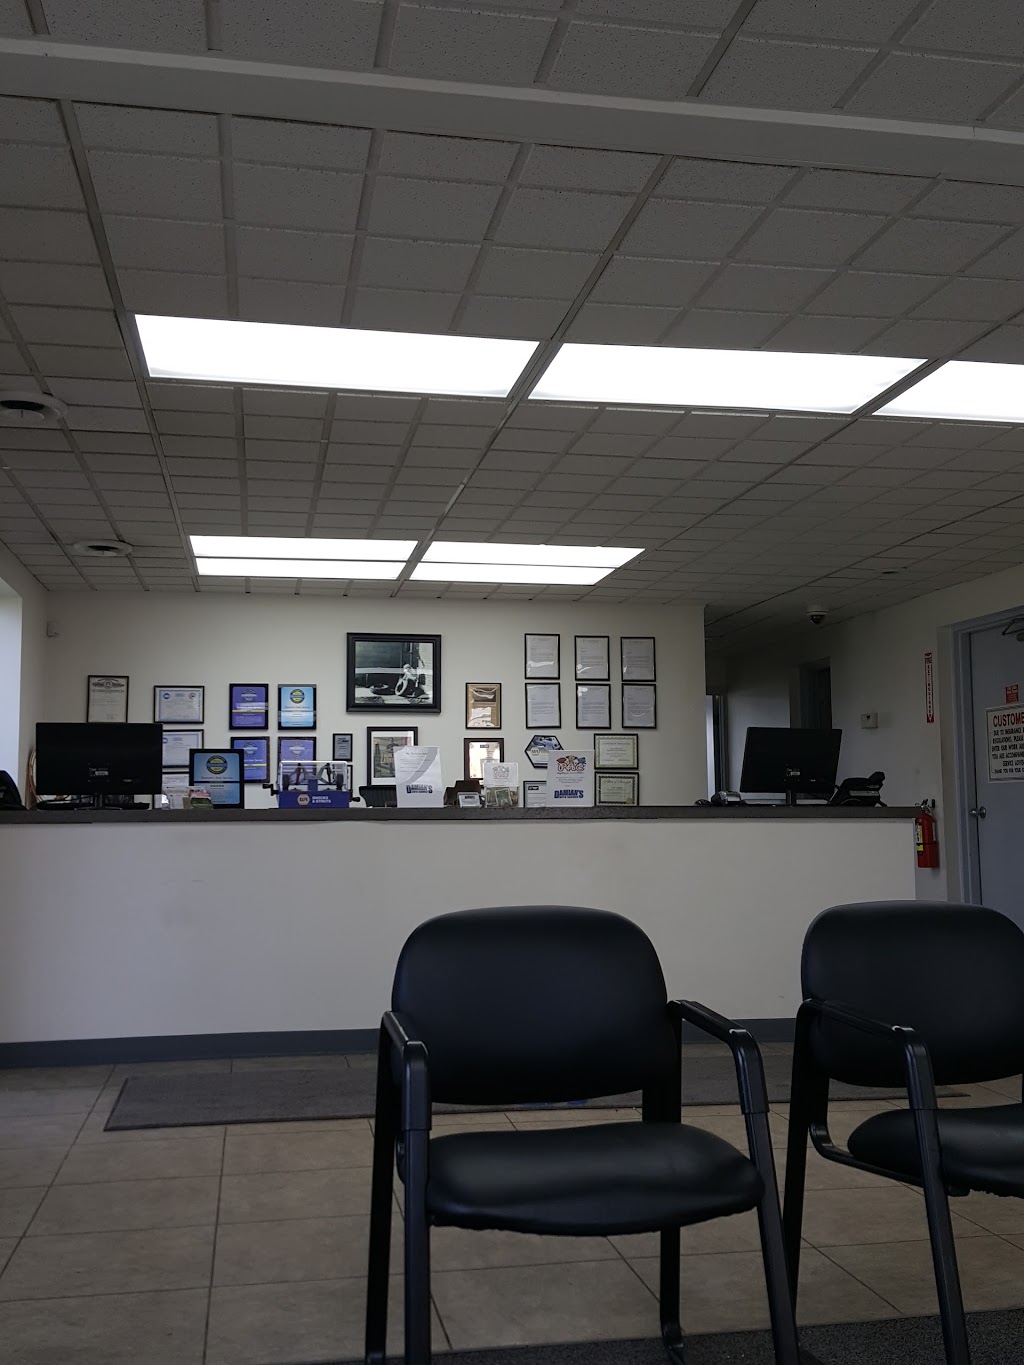 Damians Auto Service | 6200 15 Mile Rd, Sterling Heights, MI 48312 | Phone: (586) 698-2175